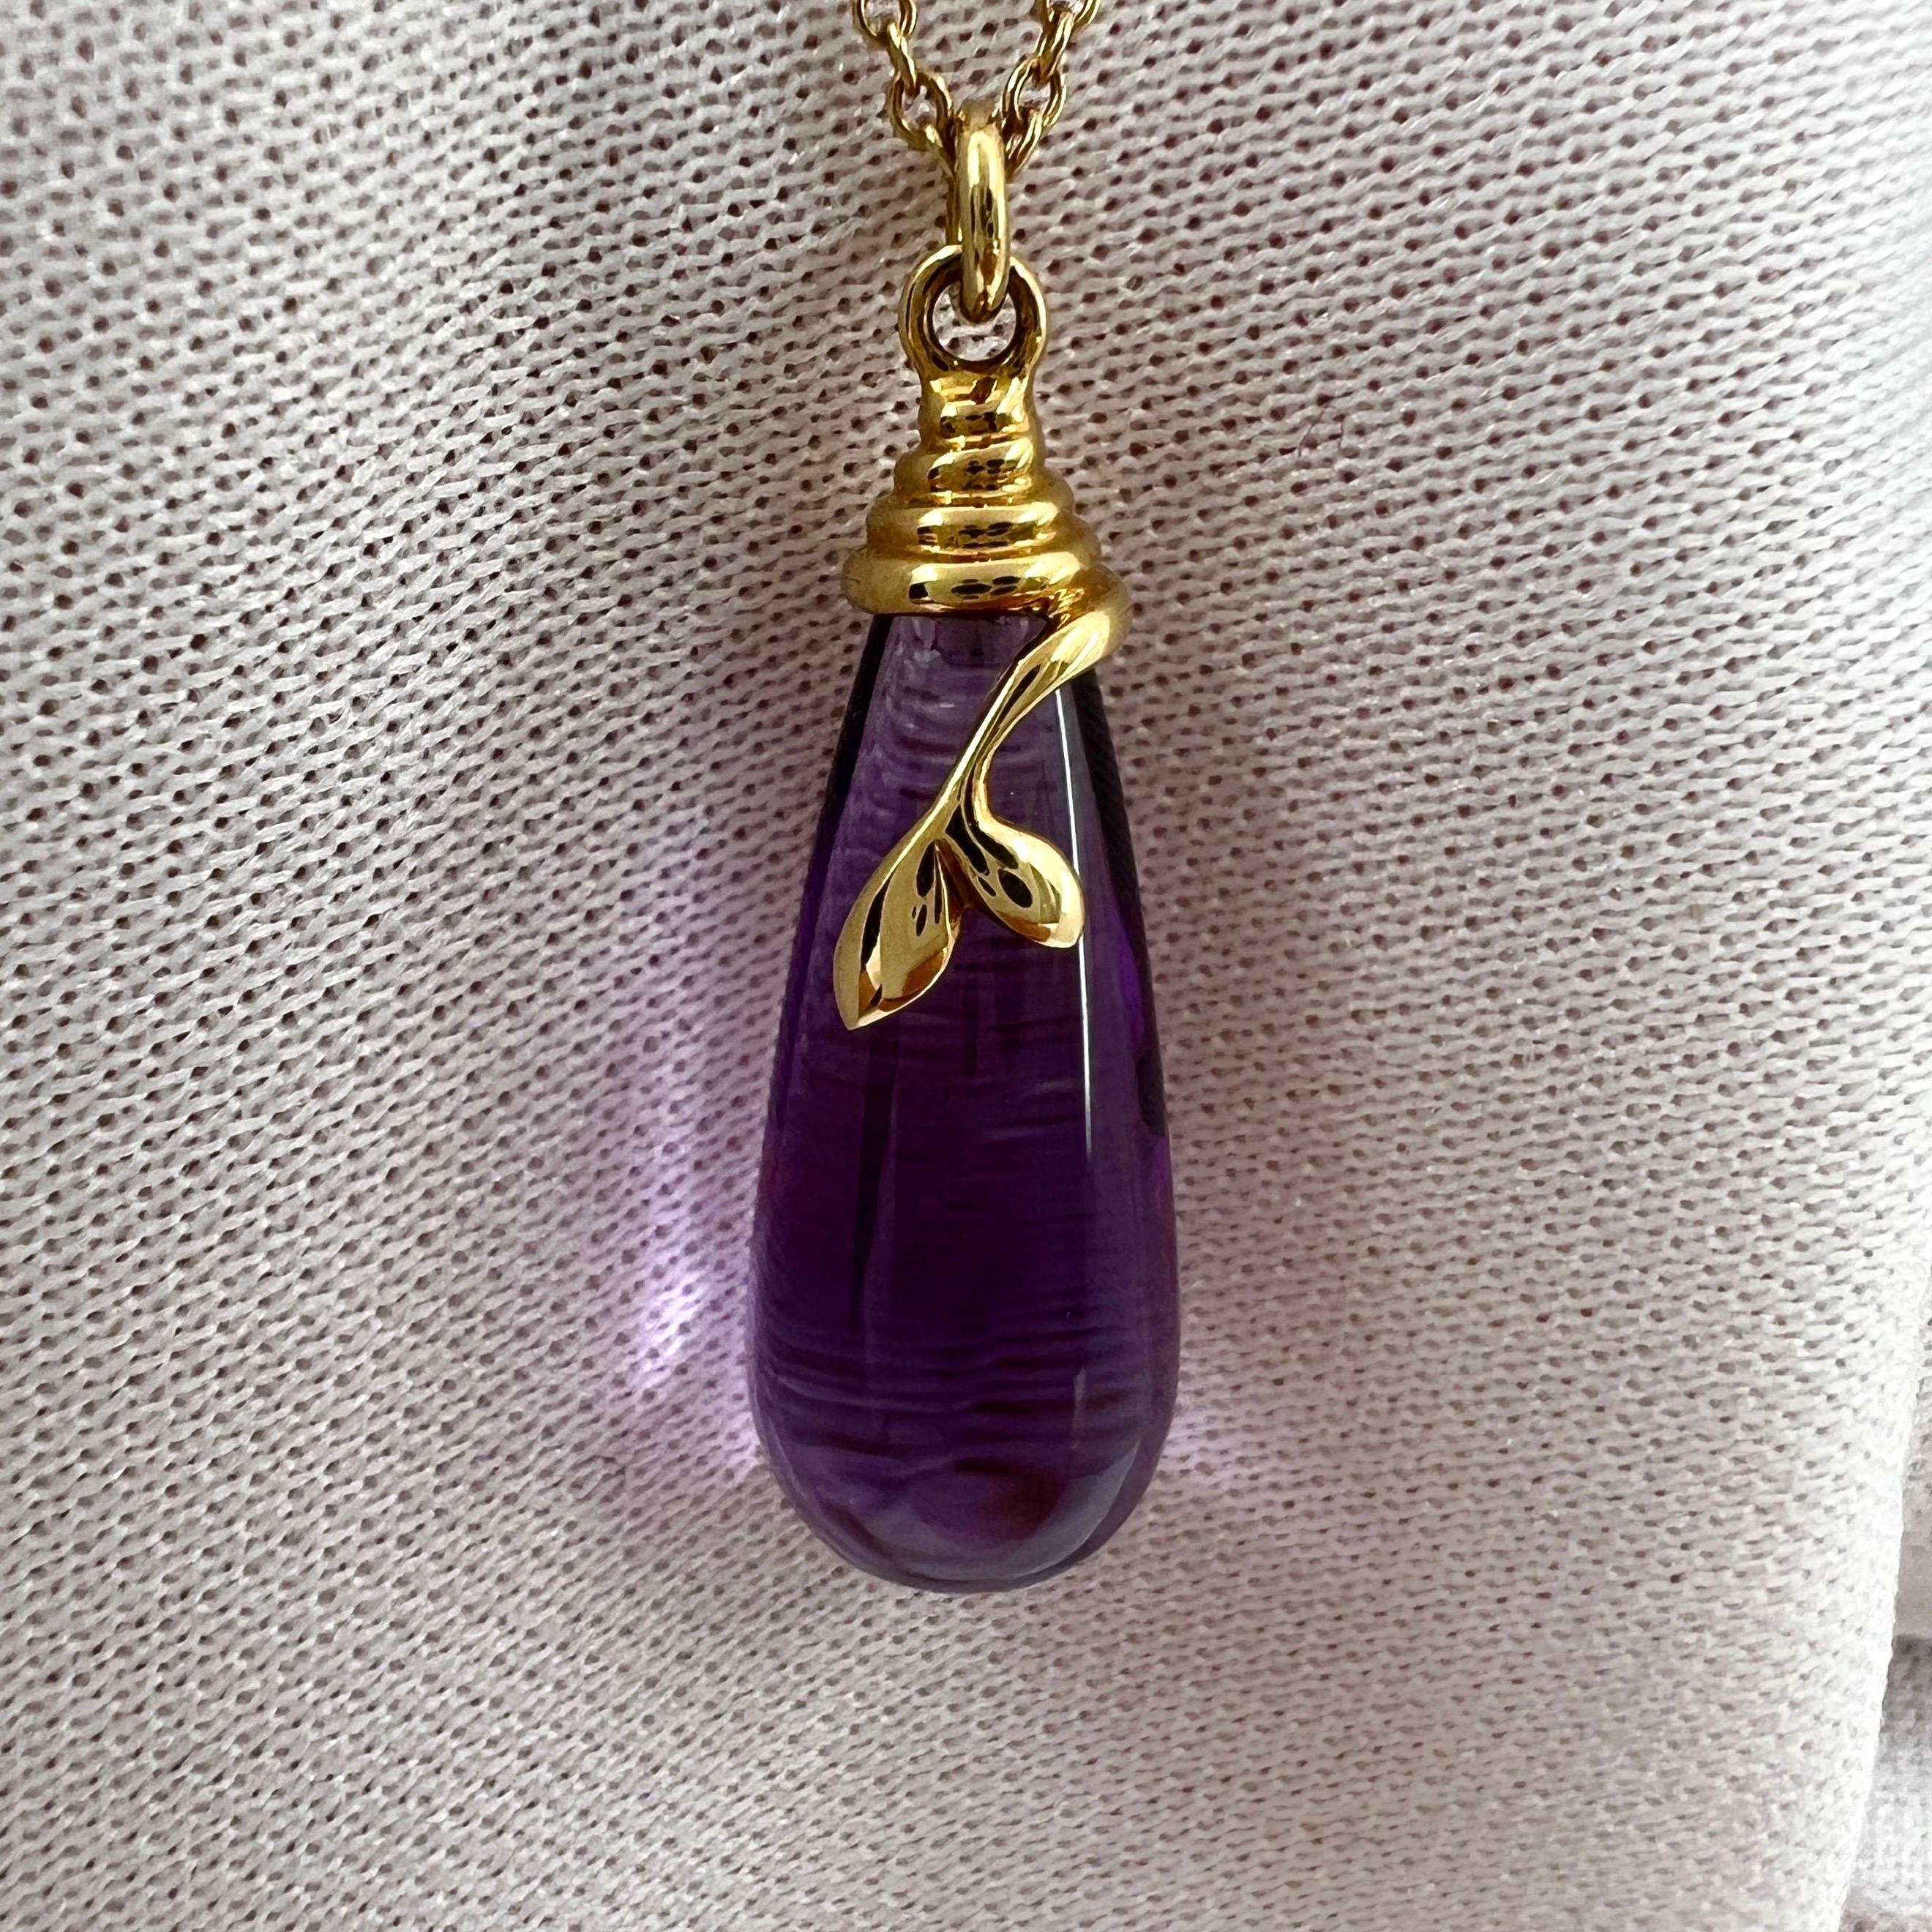 Rare Tiffany & Co. Paloma Picasso Olive Leaf Amethyst Gold Drop Pendant Necklace For Sale 6